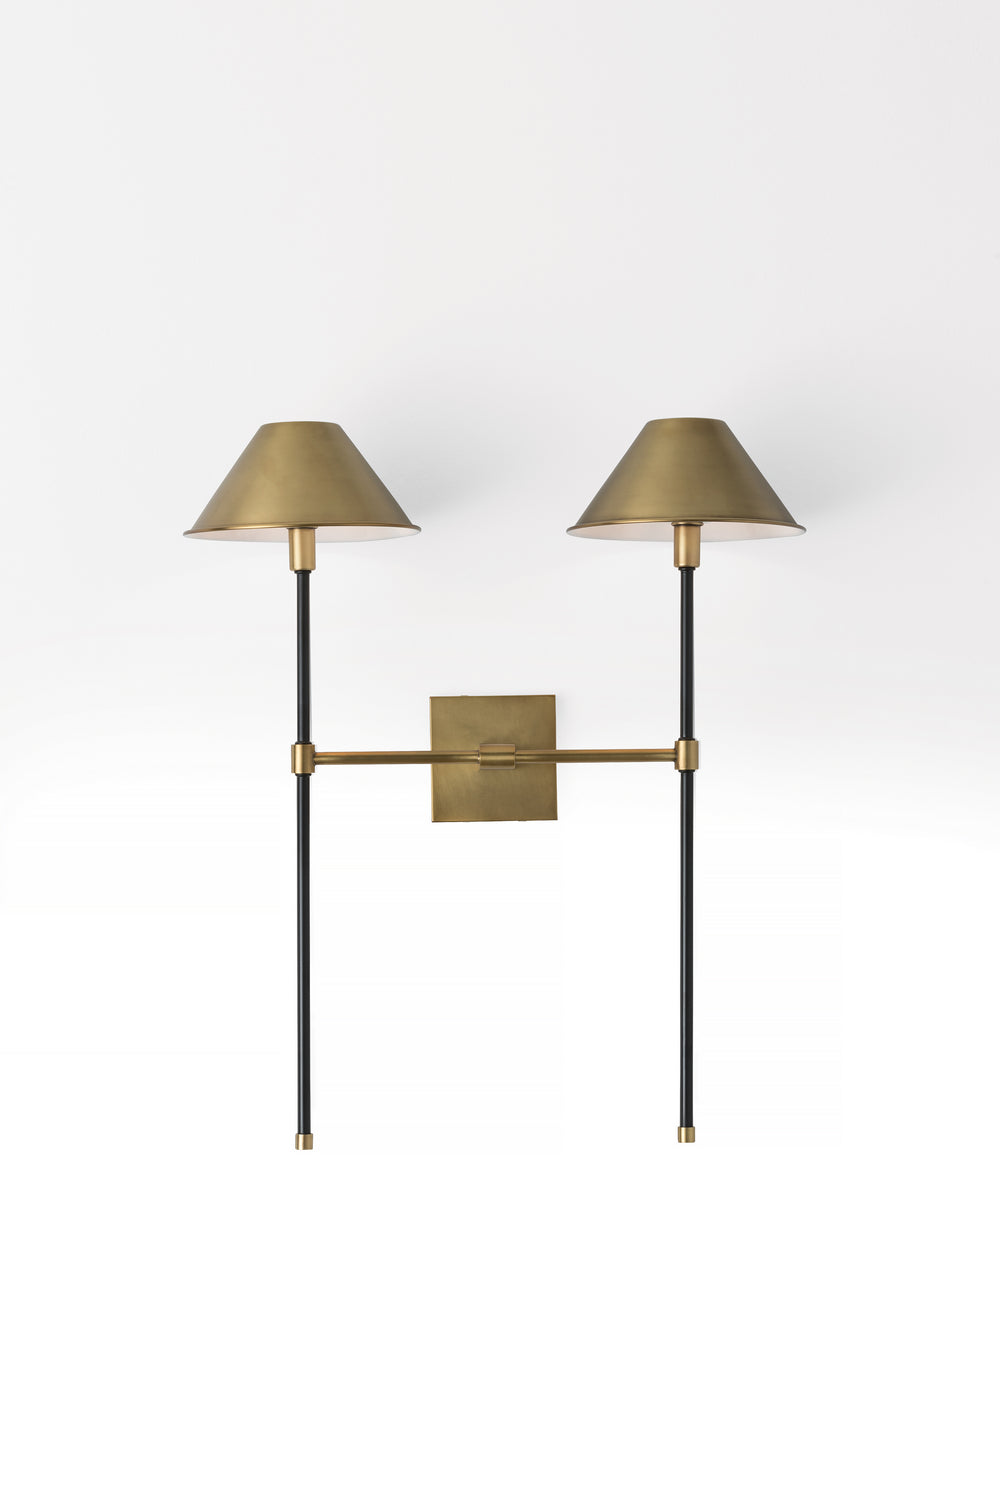 Two Light Wall Sconce from the Havana collection in Antique Brass finish